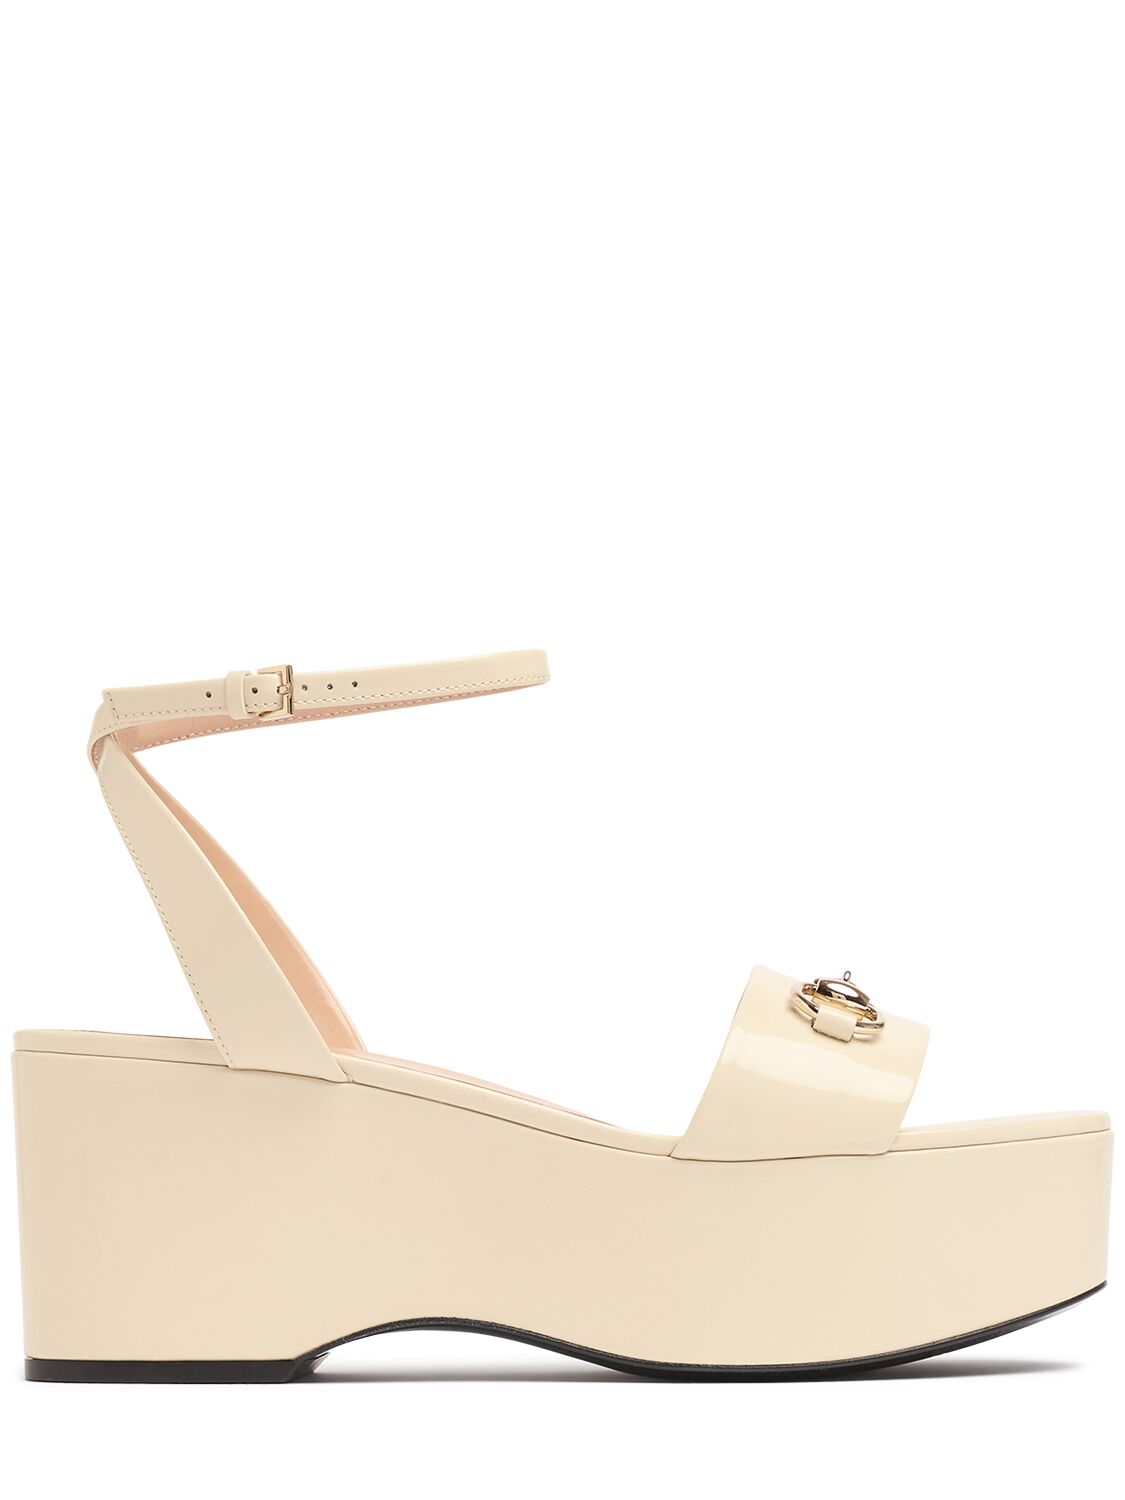 Gucci Lady Horsebit Leather Sandals In White